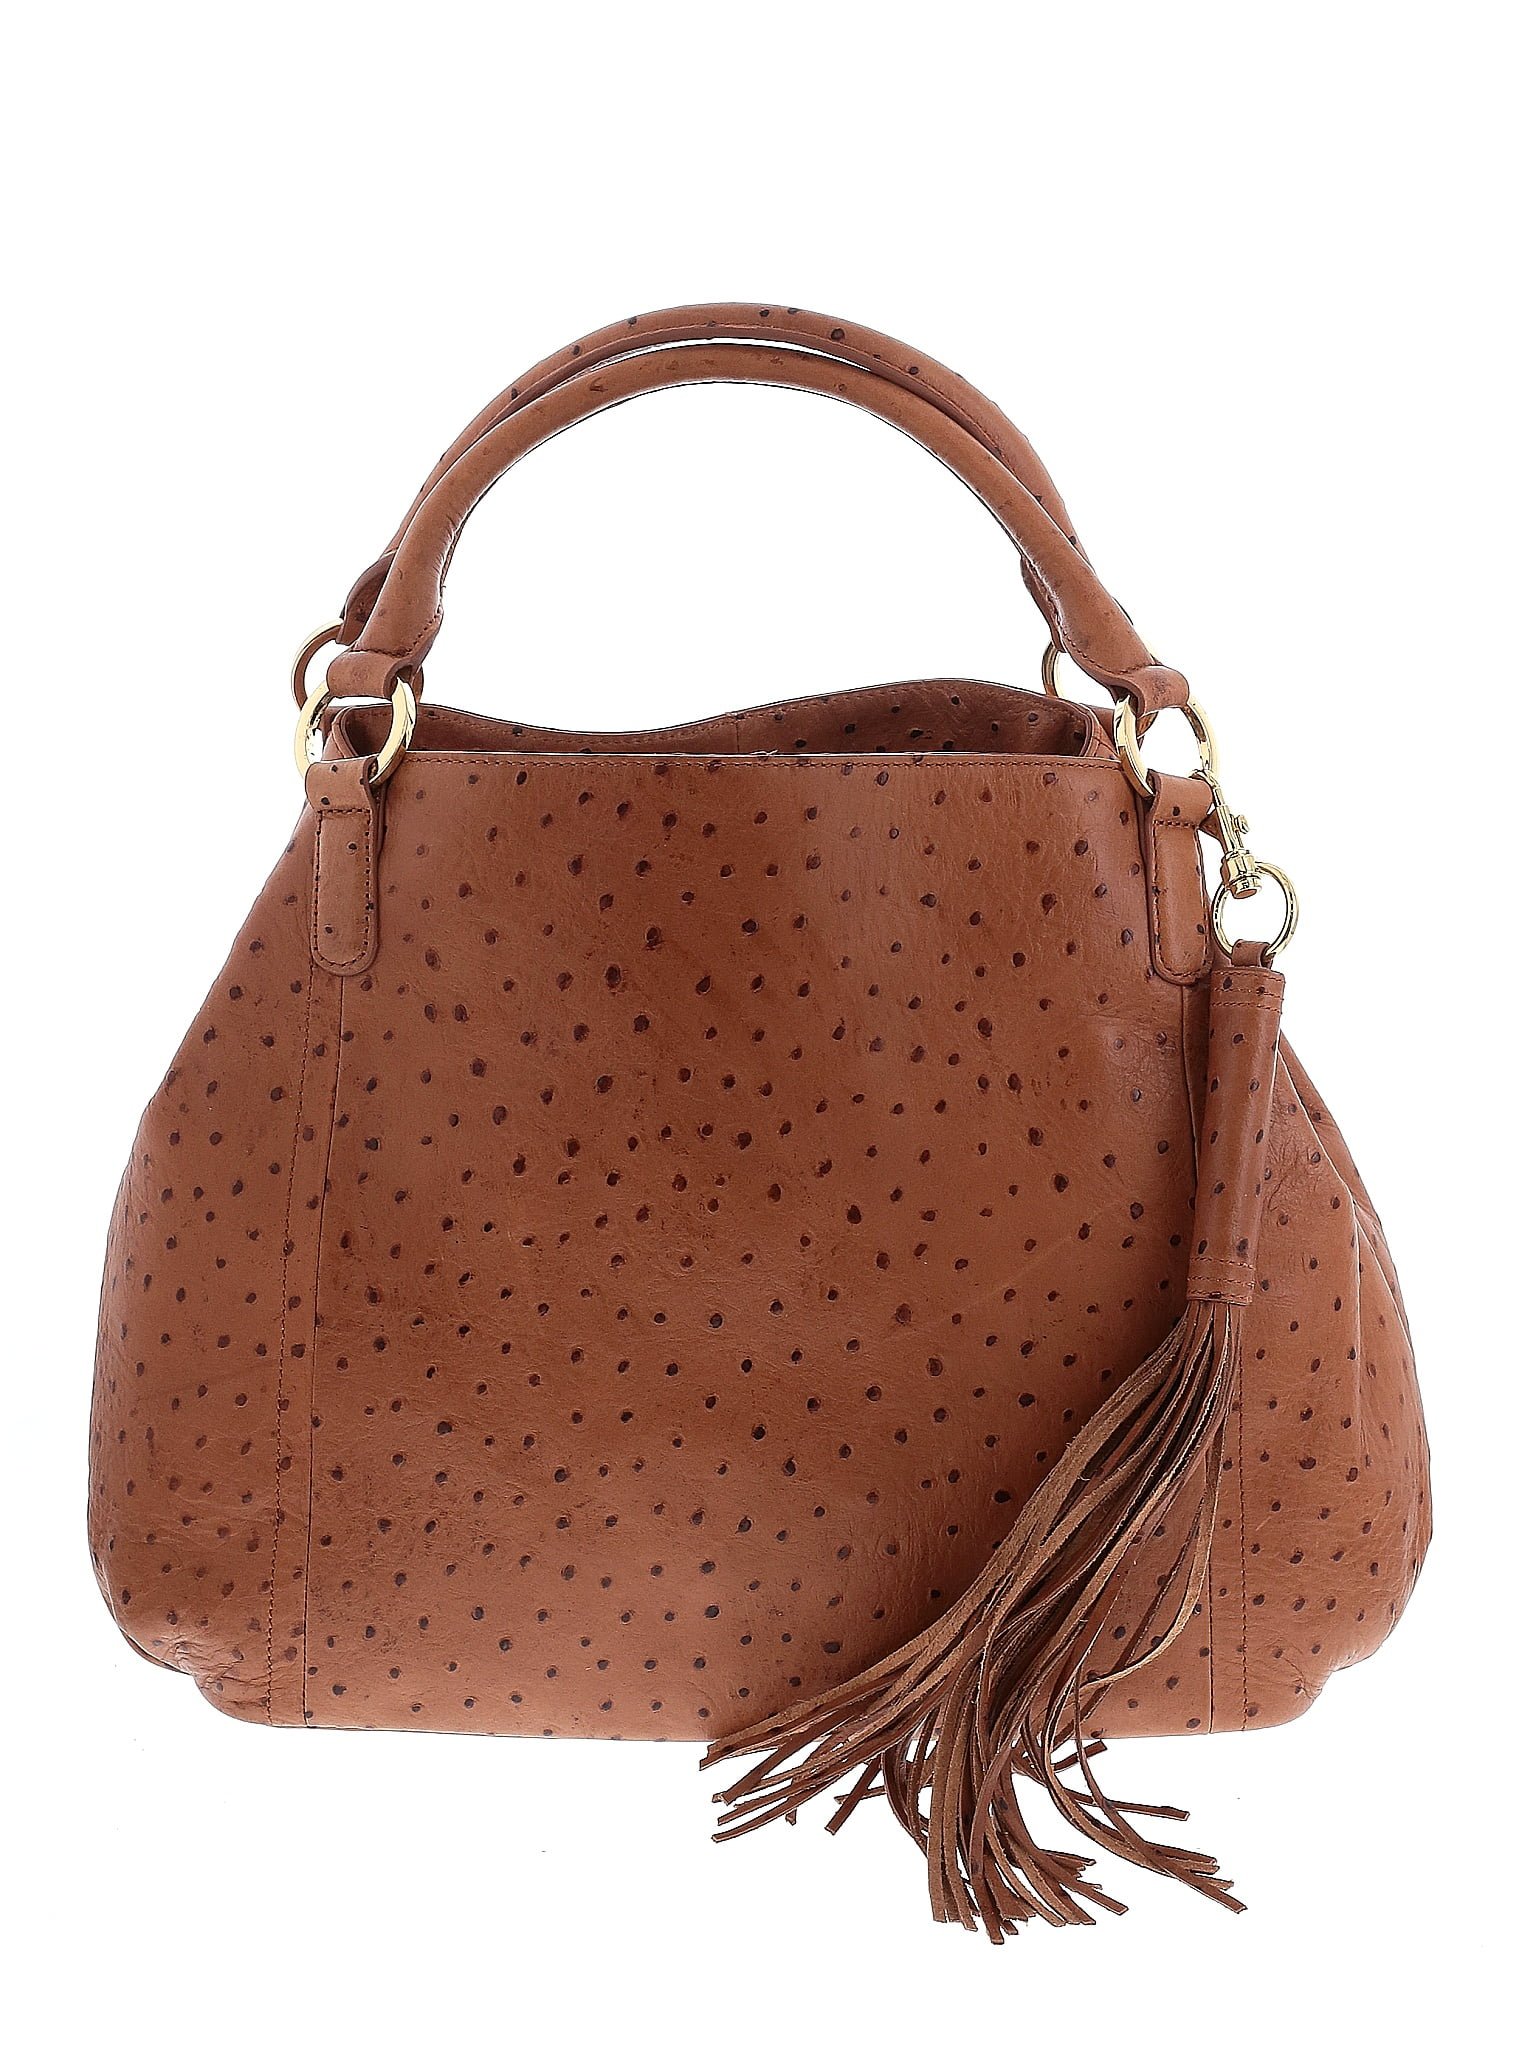 NEW GILI GOT IT LOVE IT BROWN OSTRICH EMBOSSED LEATHER SATCHEL